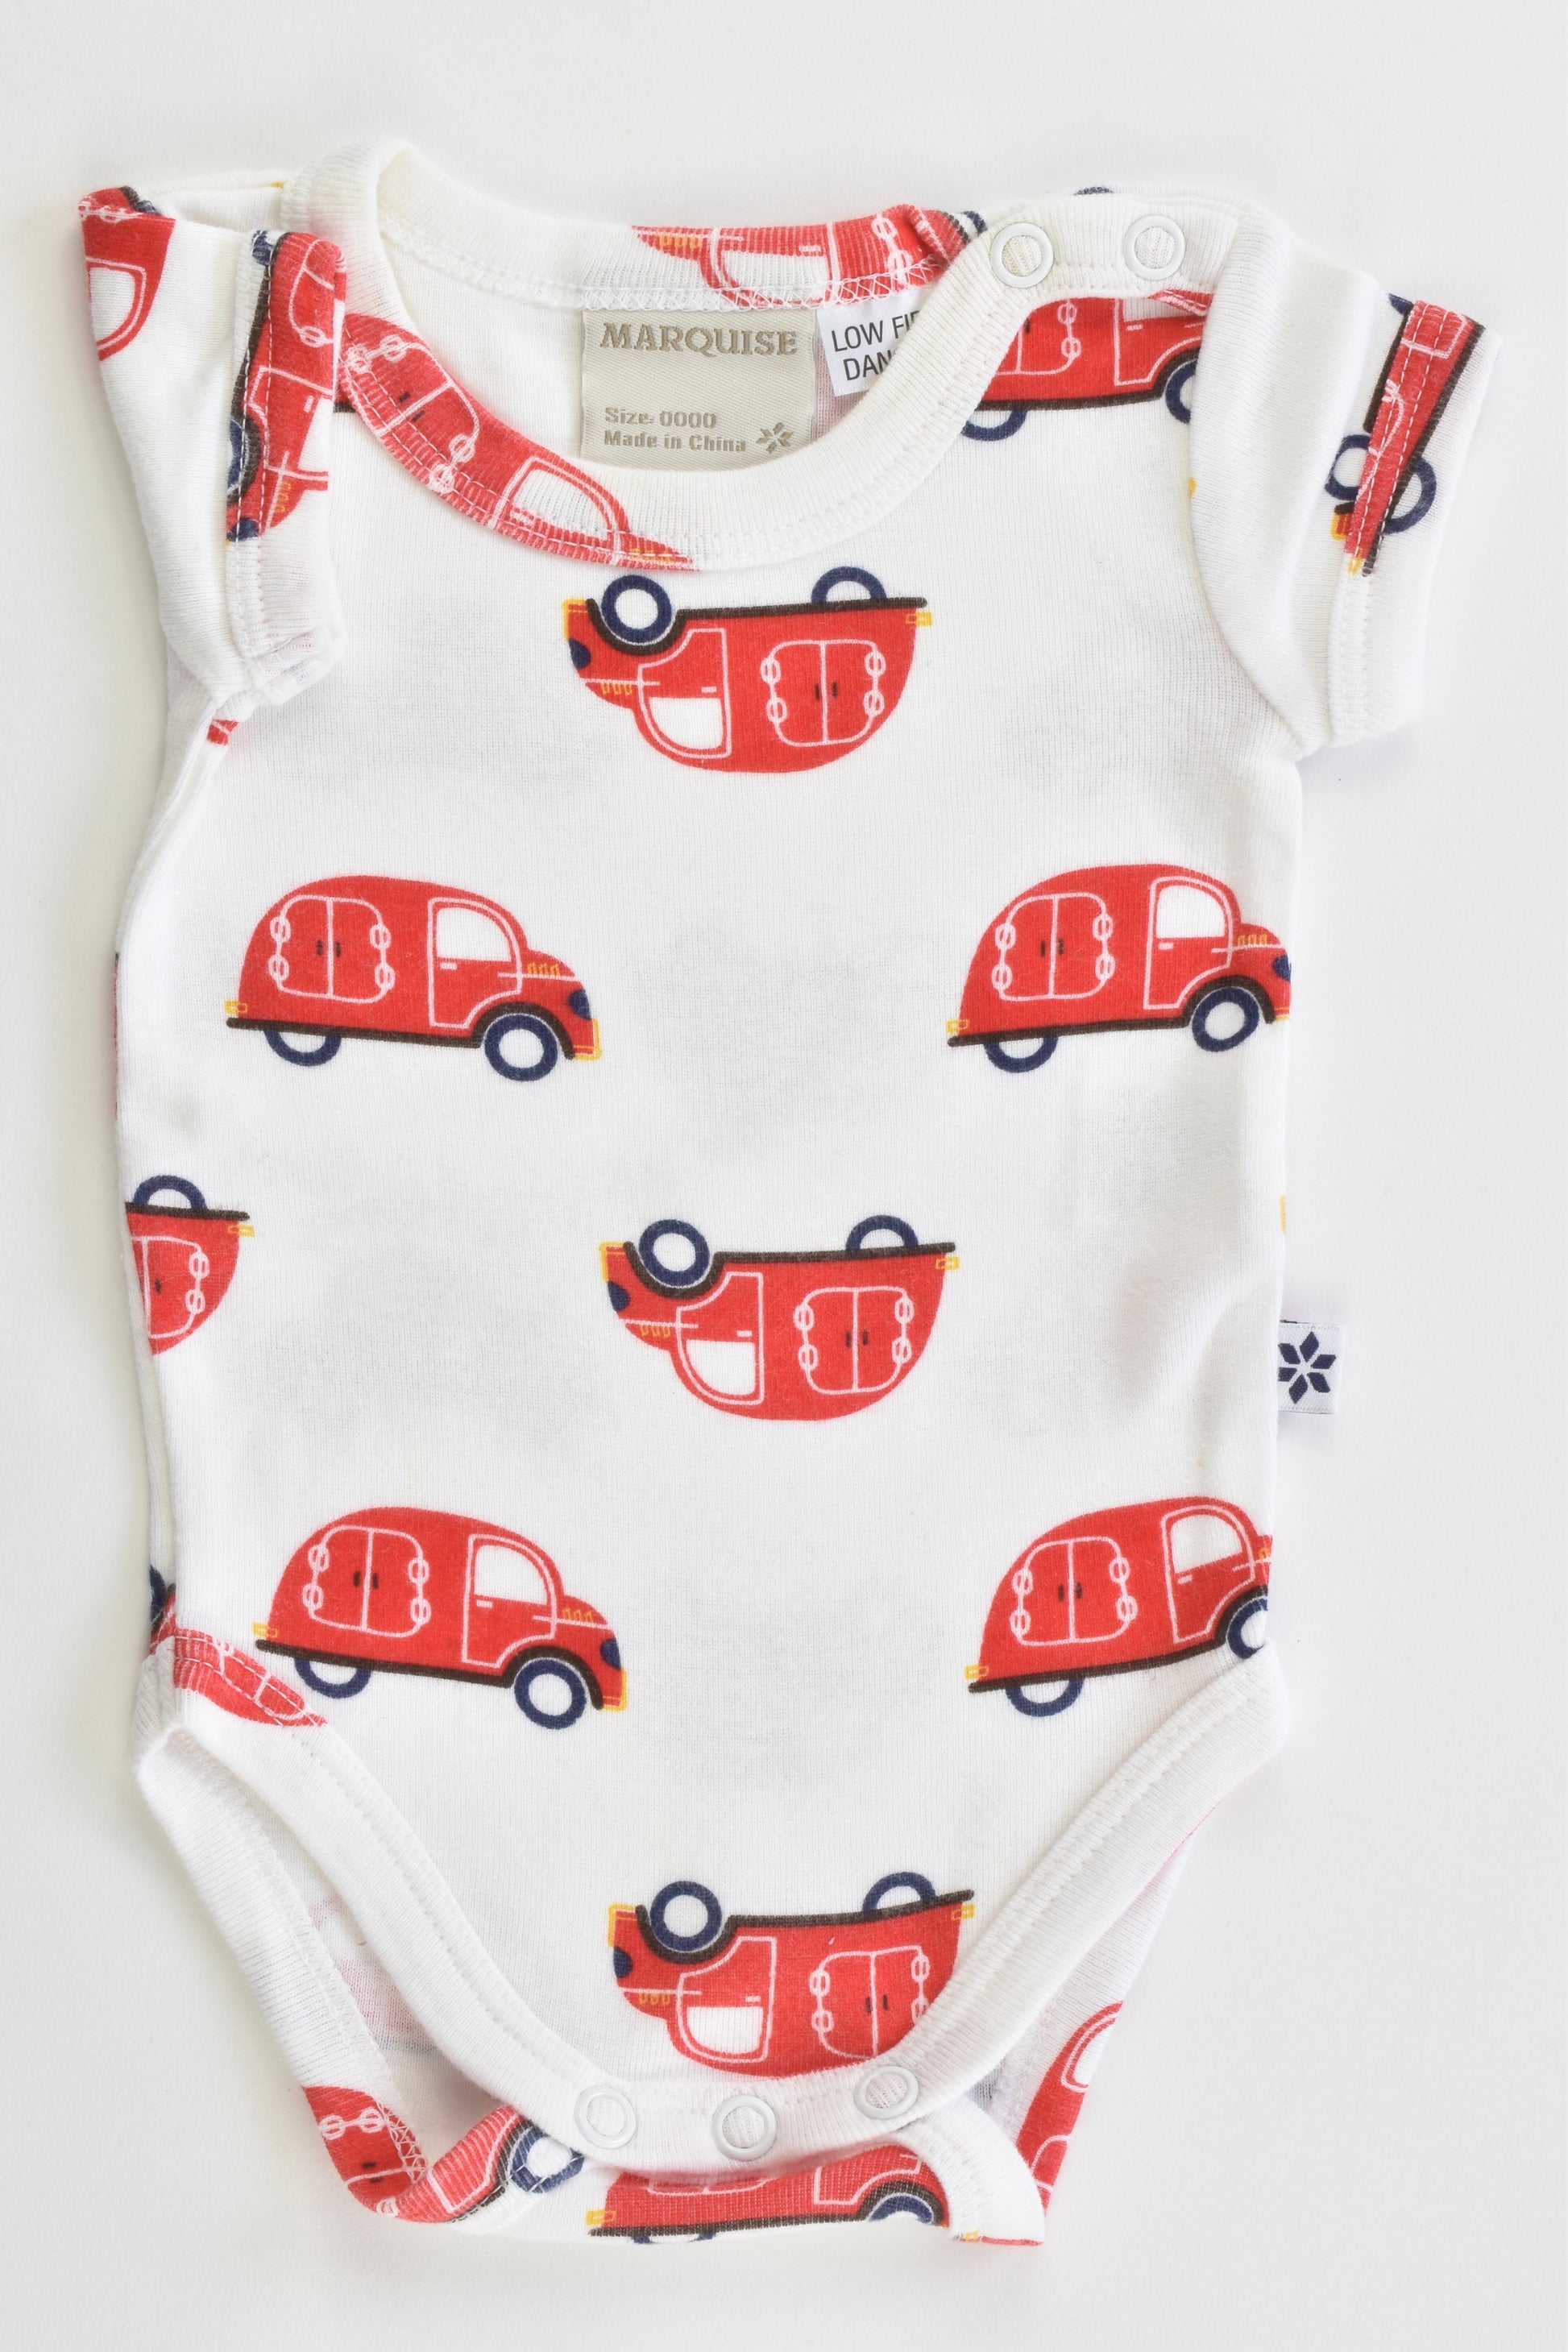 Marquise Size 0000 Cars Bodysuit